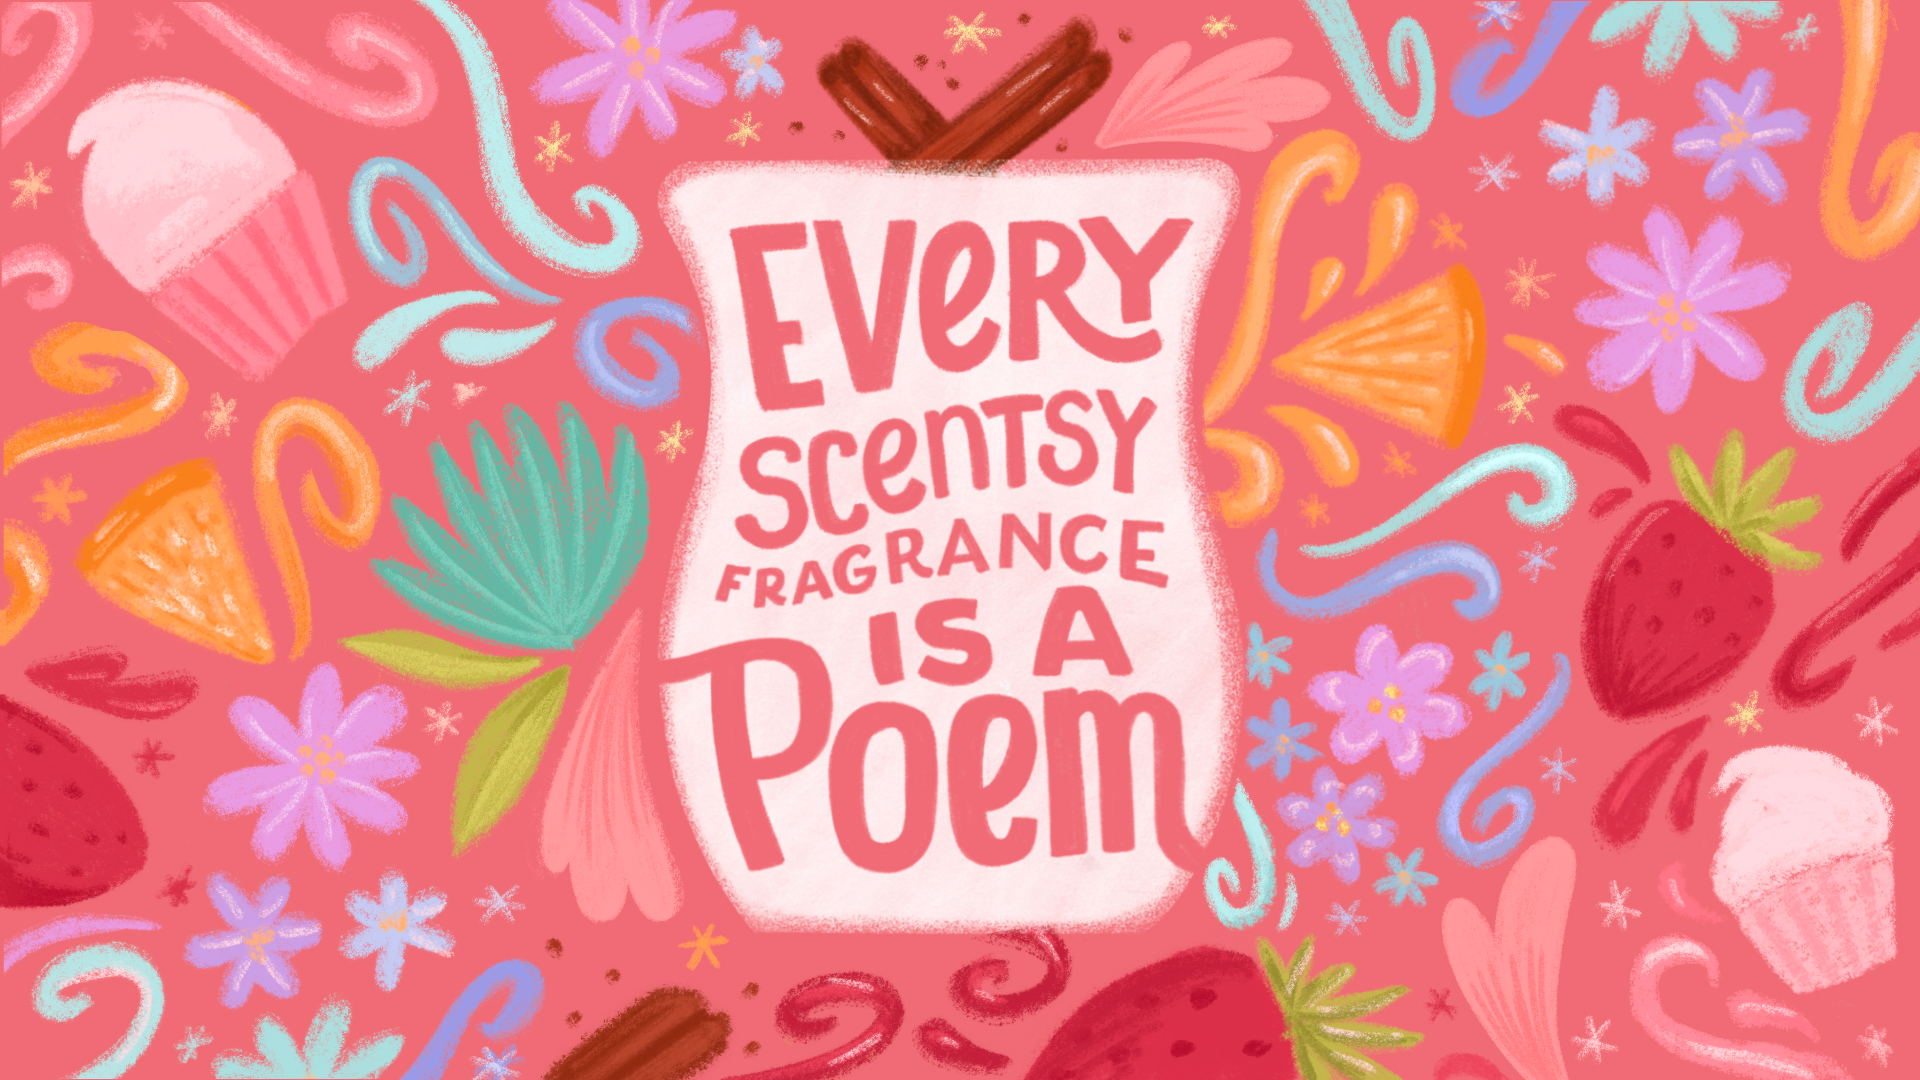 Every Scentsy fragrance is a poem